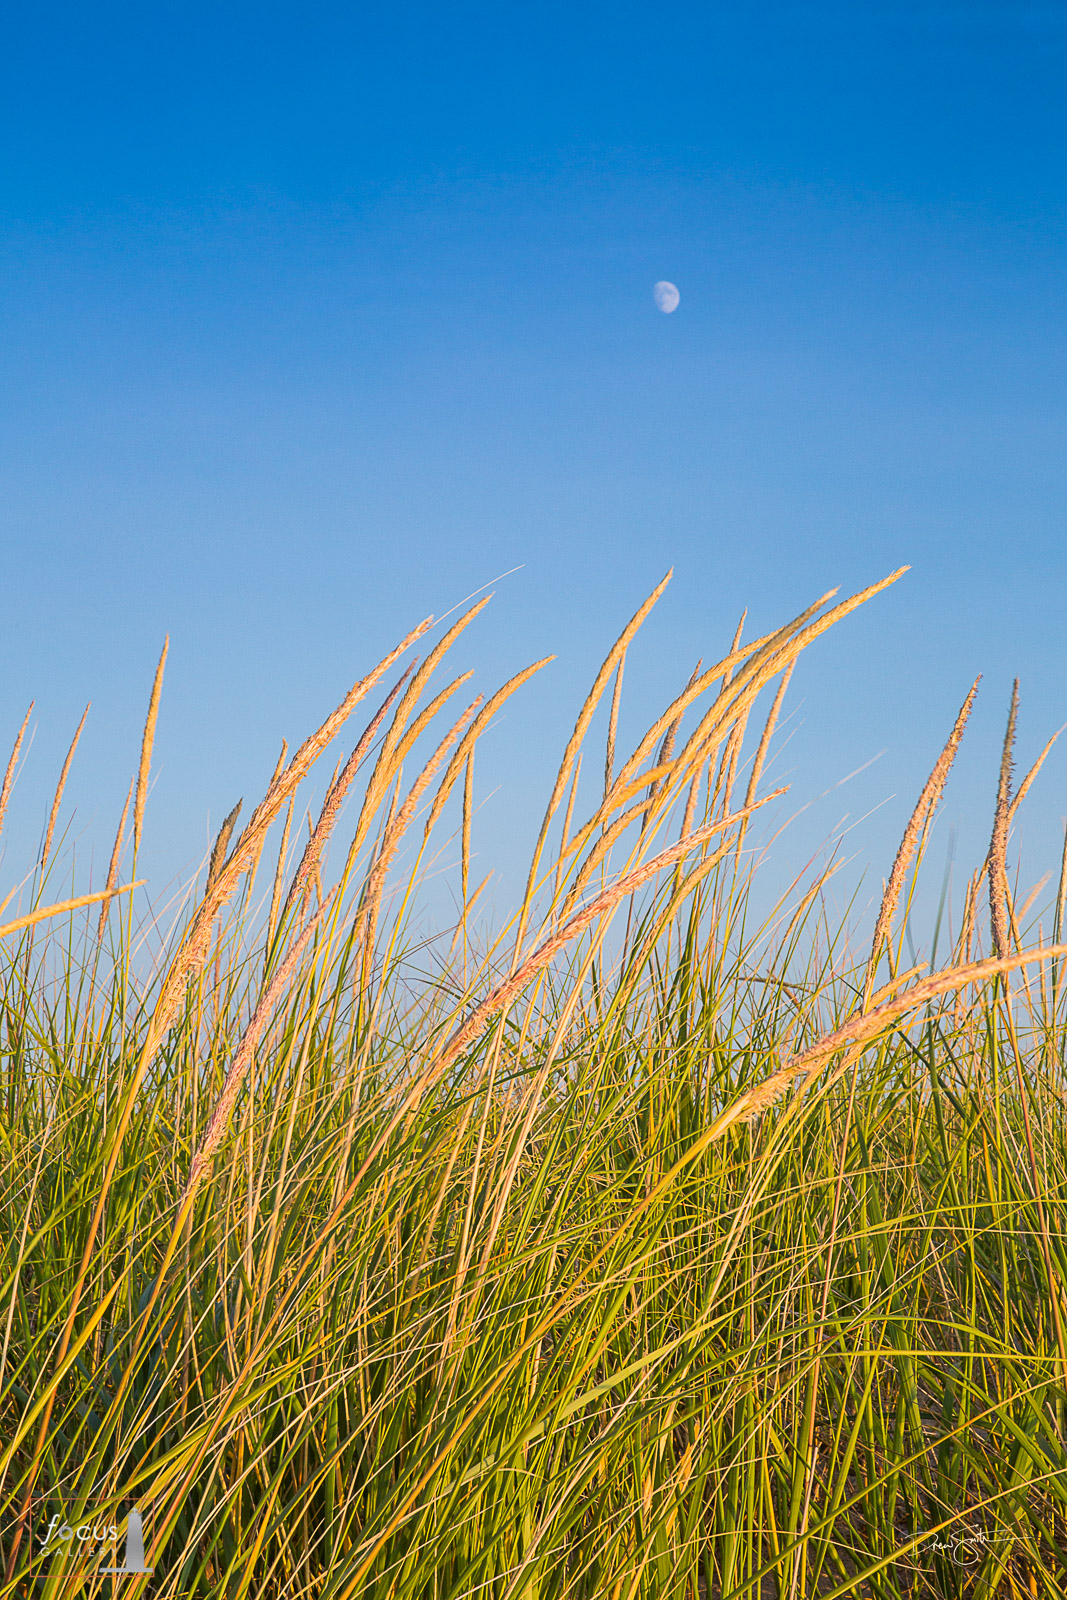 Dune grass seed heads with blue sky and moon behind.